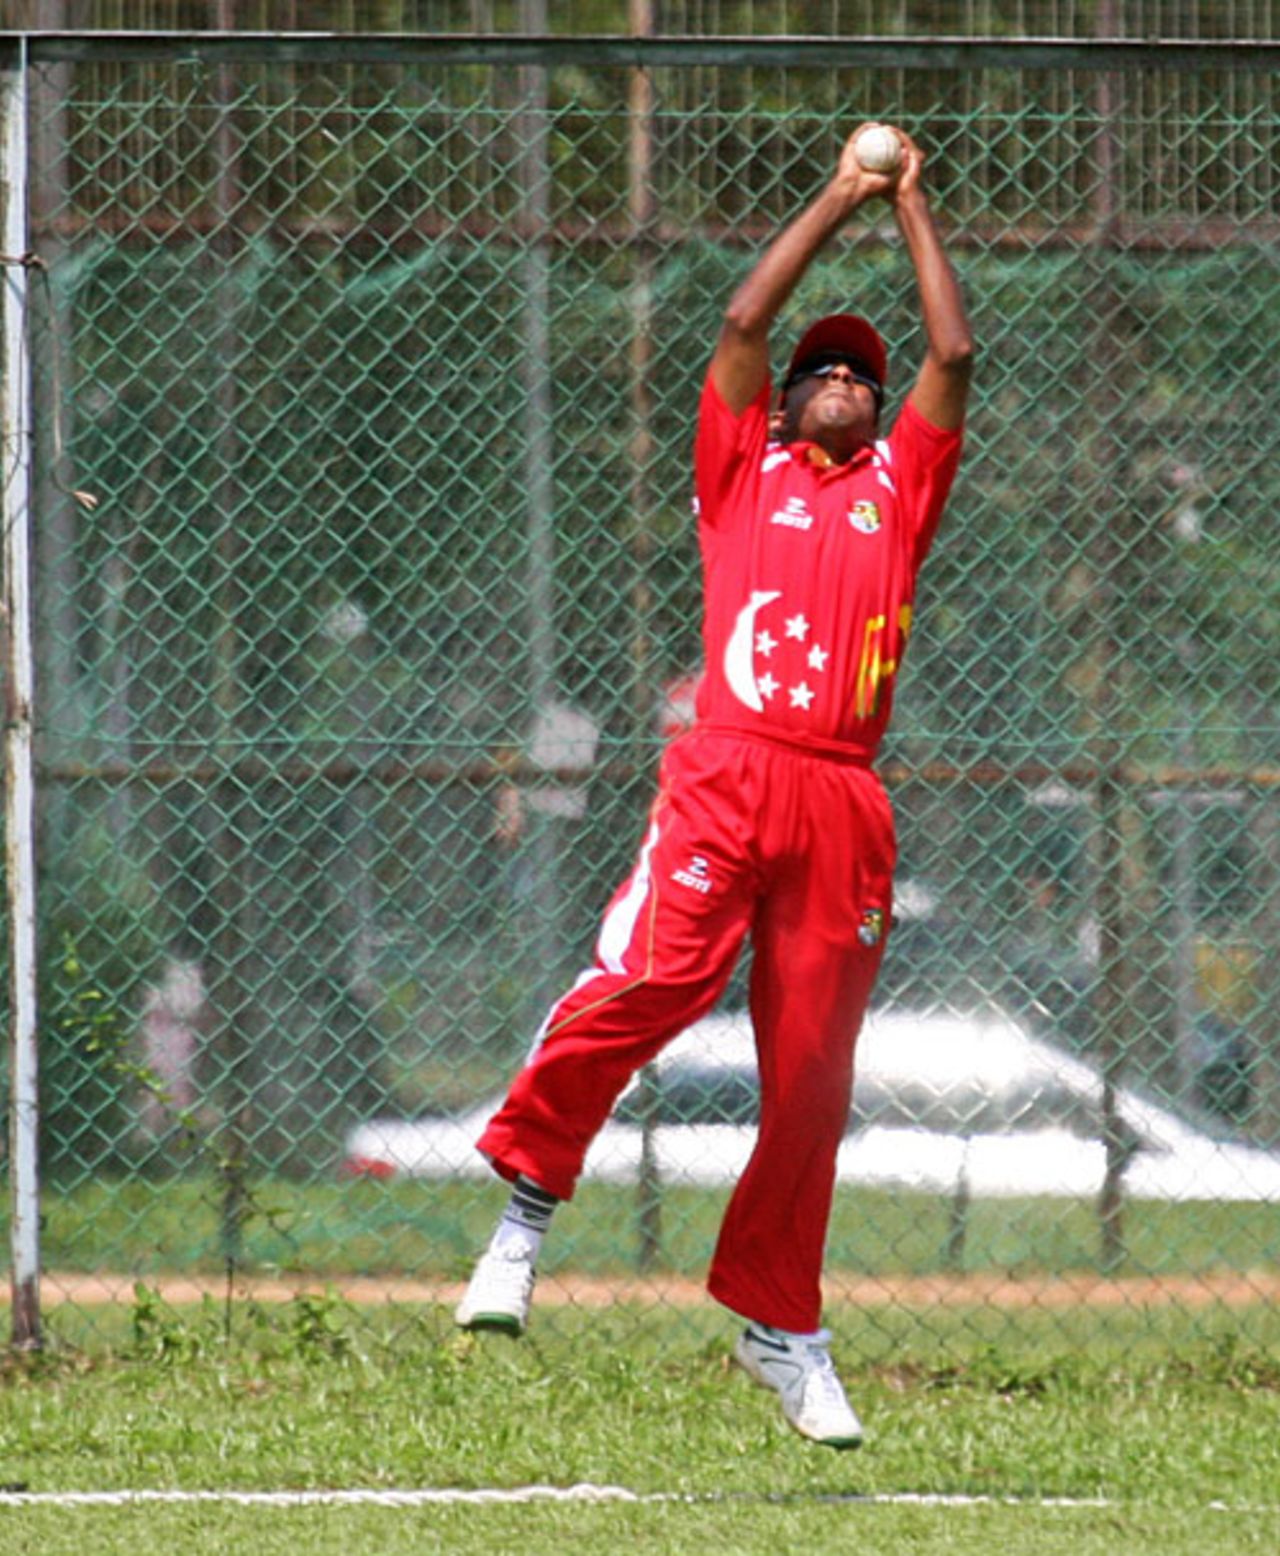 Riaz Hussien  takes a catch to dismiss Zaheer Ashiq, Singapore v Norway, ICC World Cricket League Division 6, Singapore, September 2, 2009